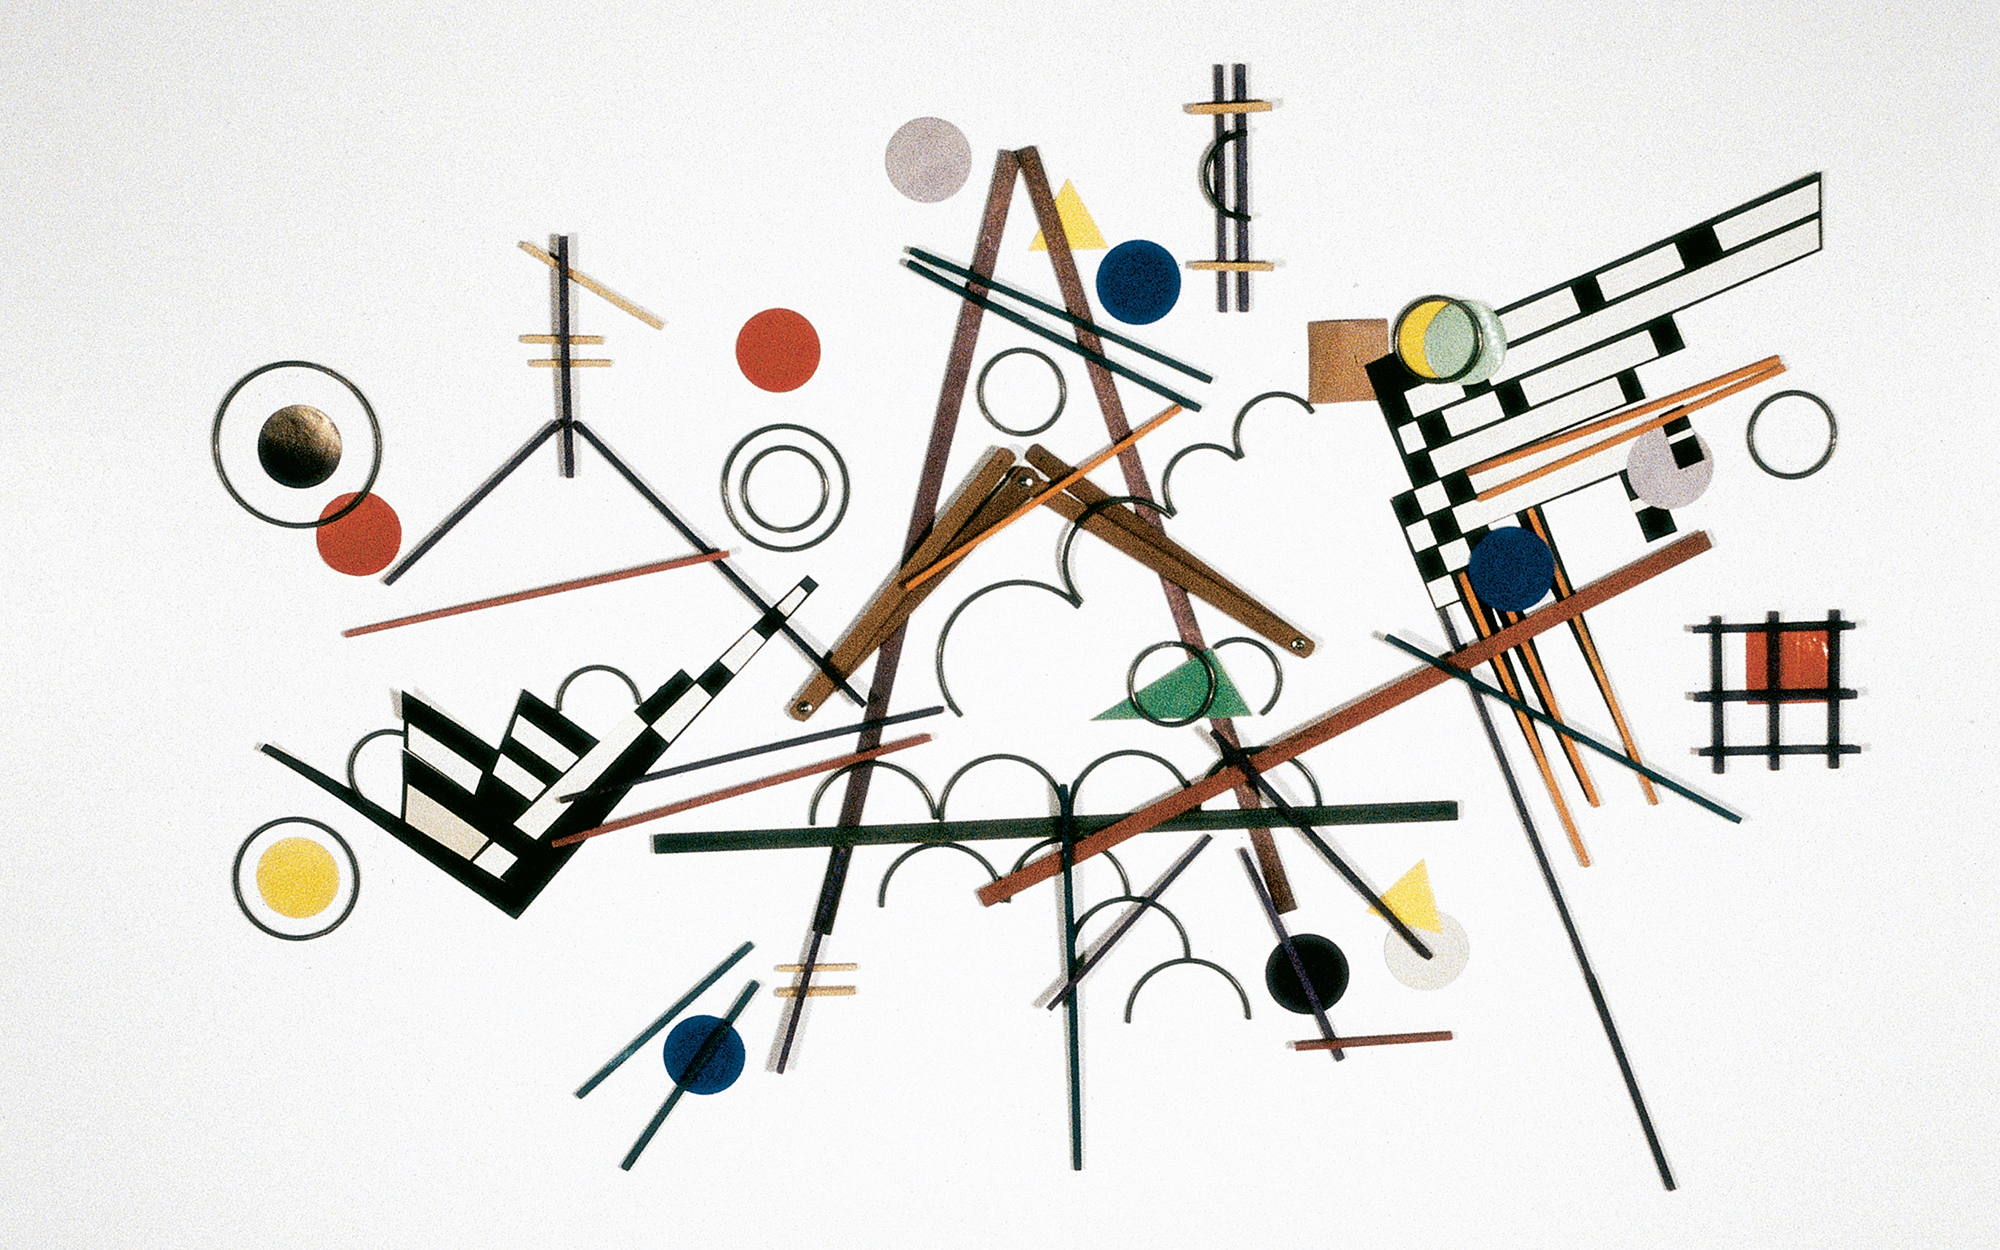 Vasily Kandinsky’s Composition 8 from 1923, recreated with kindergarten gifts number 7 (paper parquetry), 8 (sticks), 9 (rings), 14 (weaving), 15 (slats), and 16 (jointed slats).